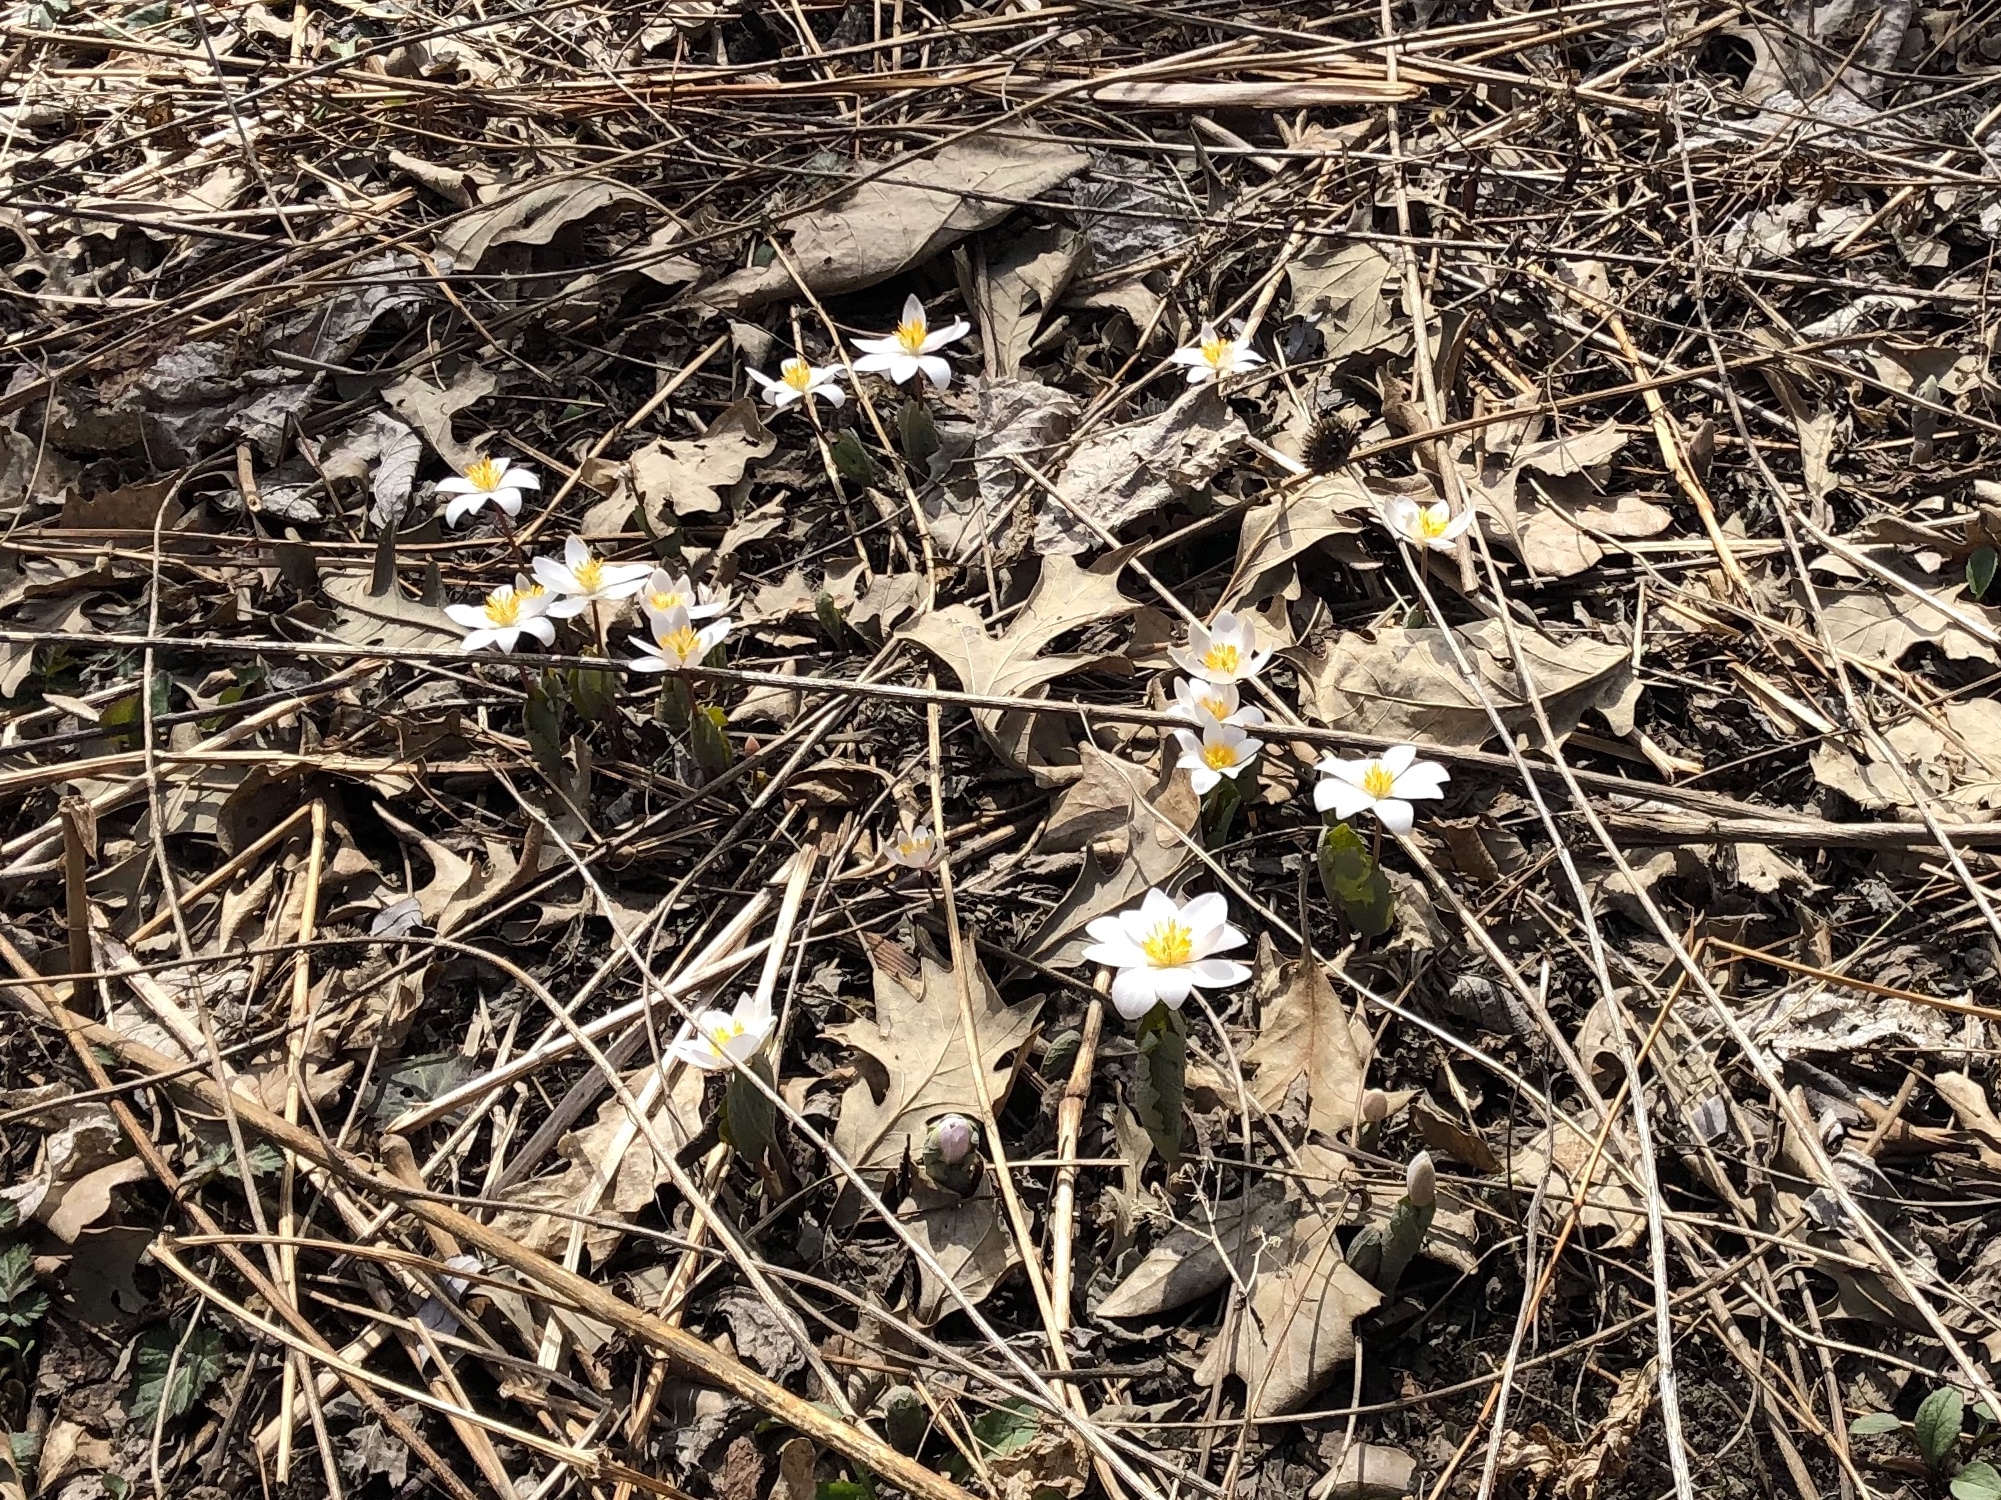 Bloodroot near Council Ring on April 3, 2019.